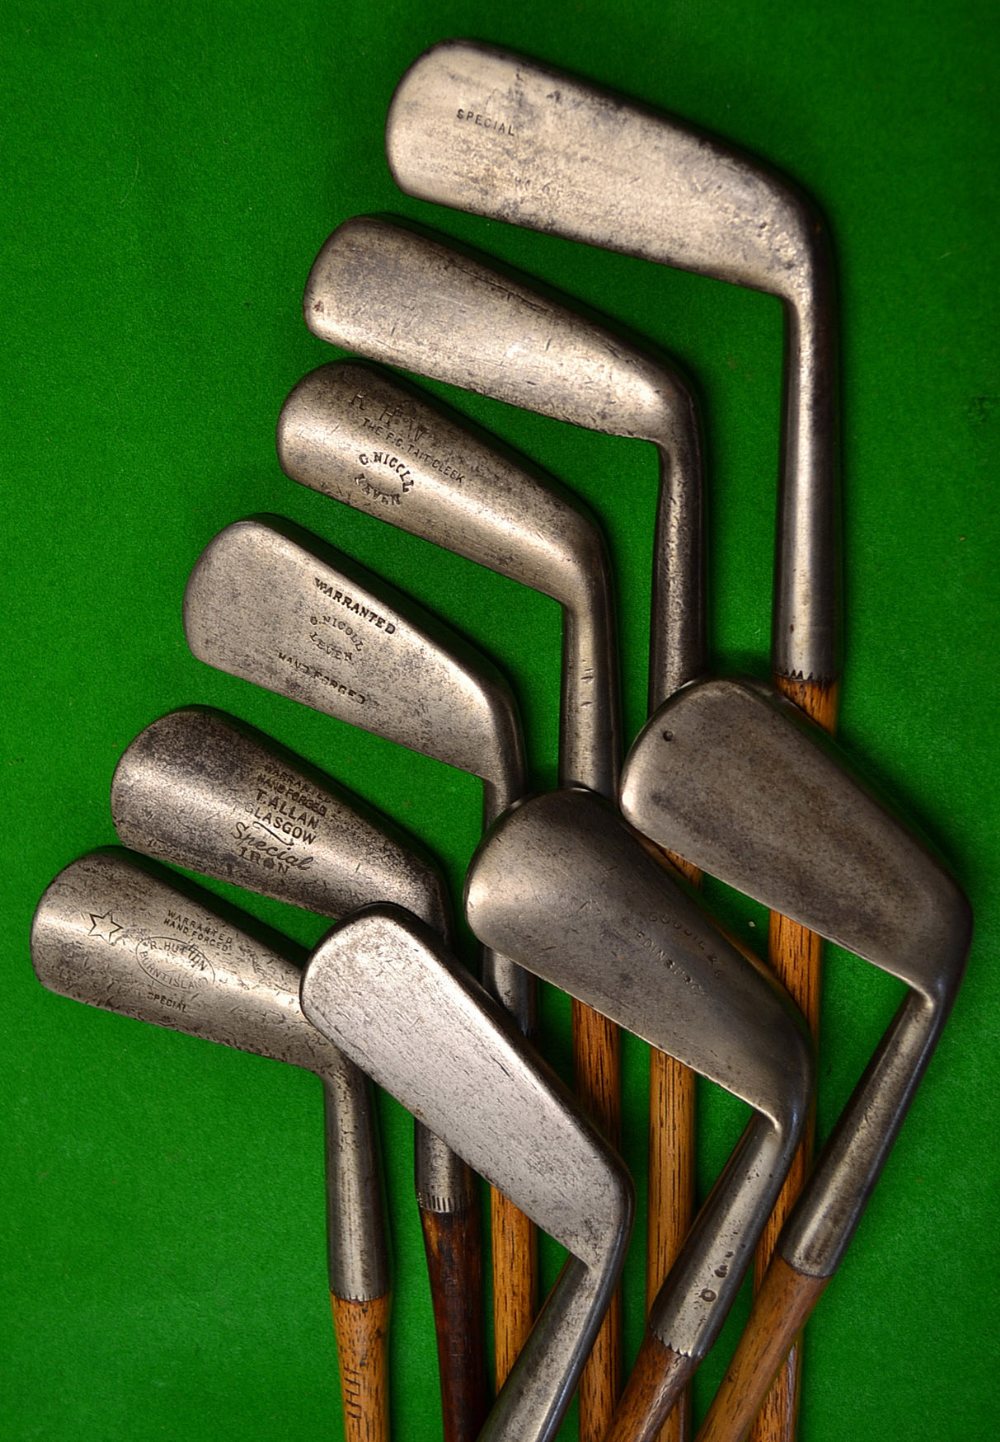 9x Assorted Smoothed Faced Irons including 3x round backs by Goodie and Co Edinburgh, Gibson of